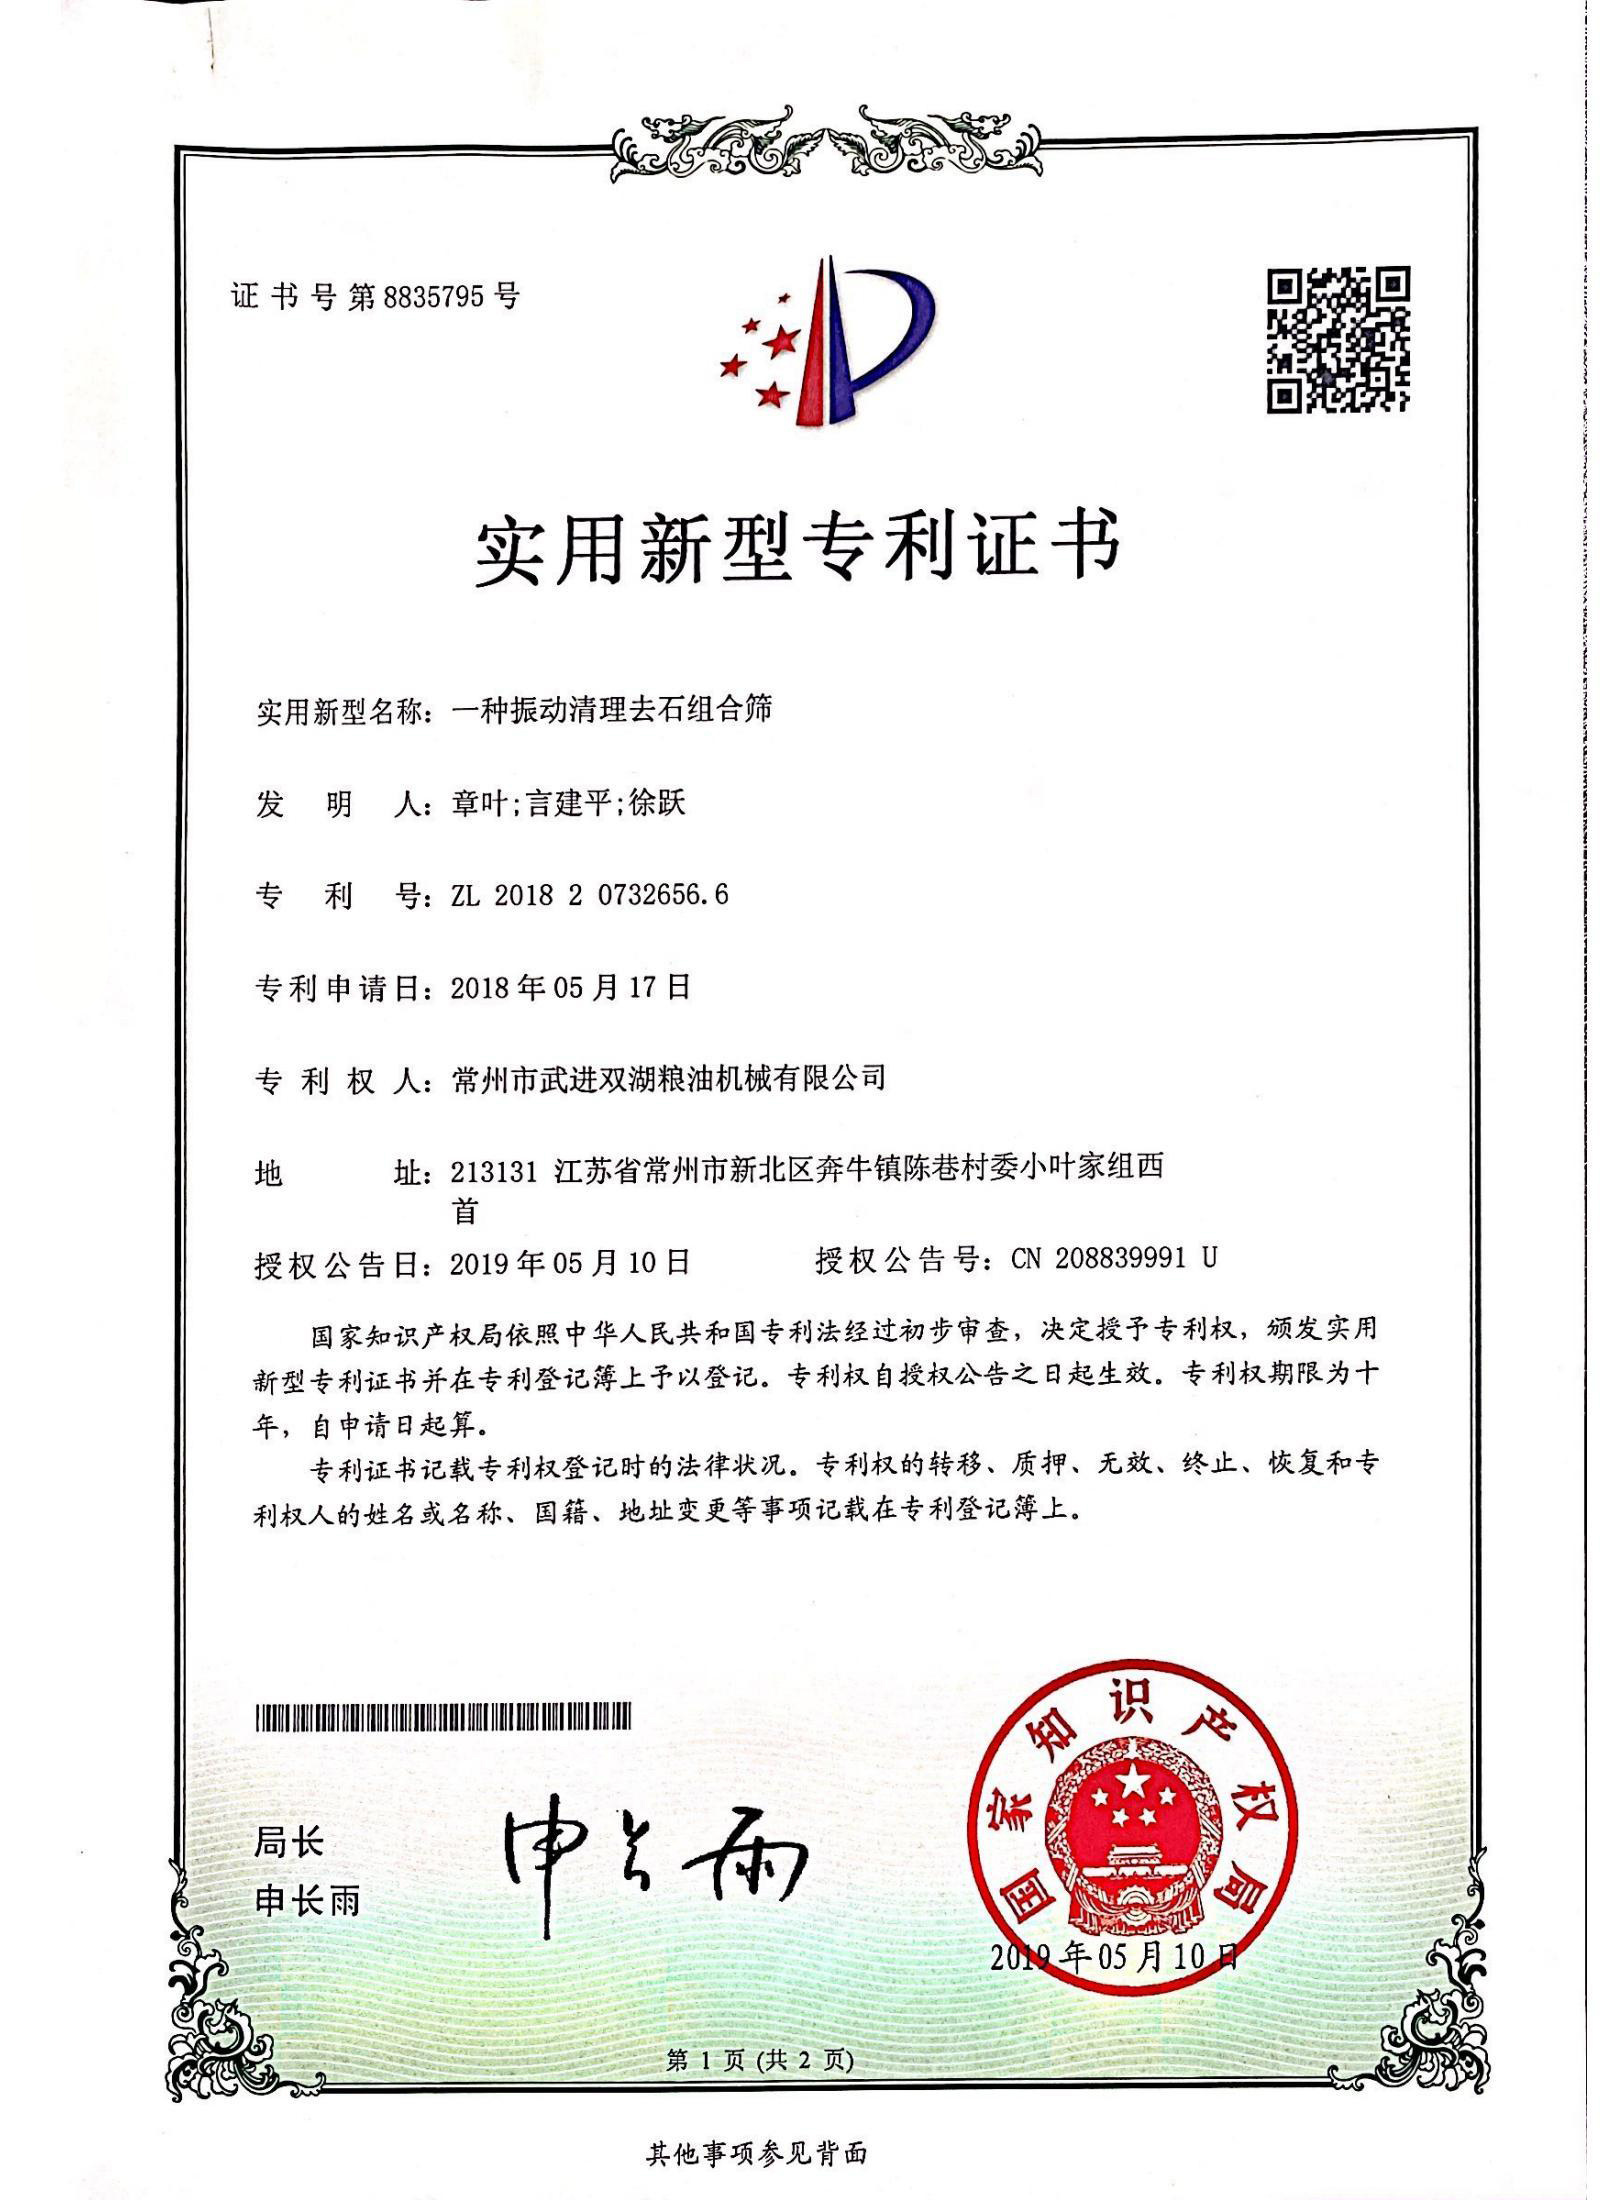 Patent certificate of vibration cleaning and stone removal combined screen